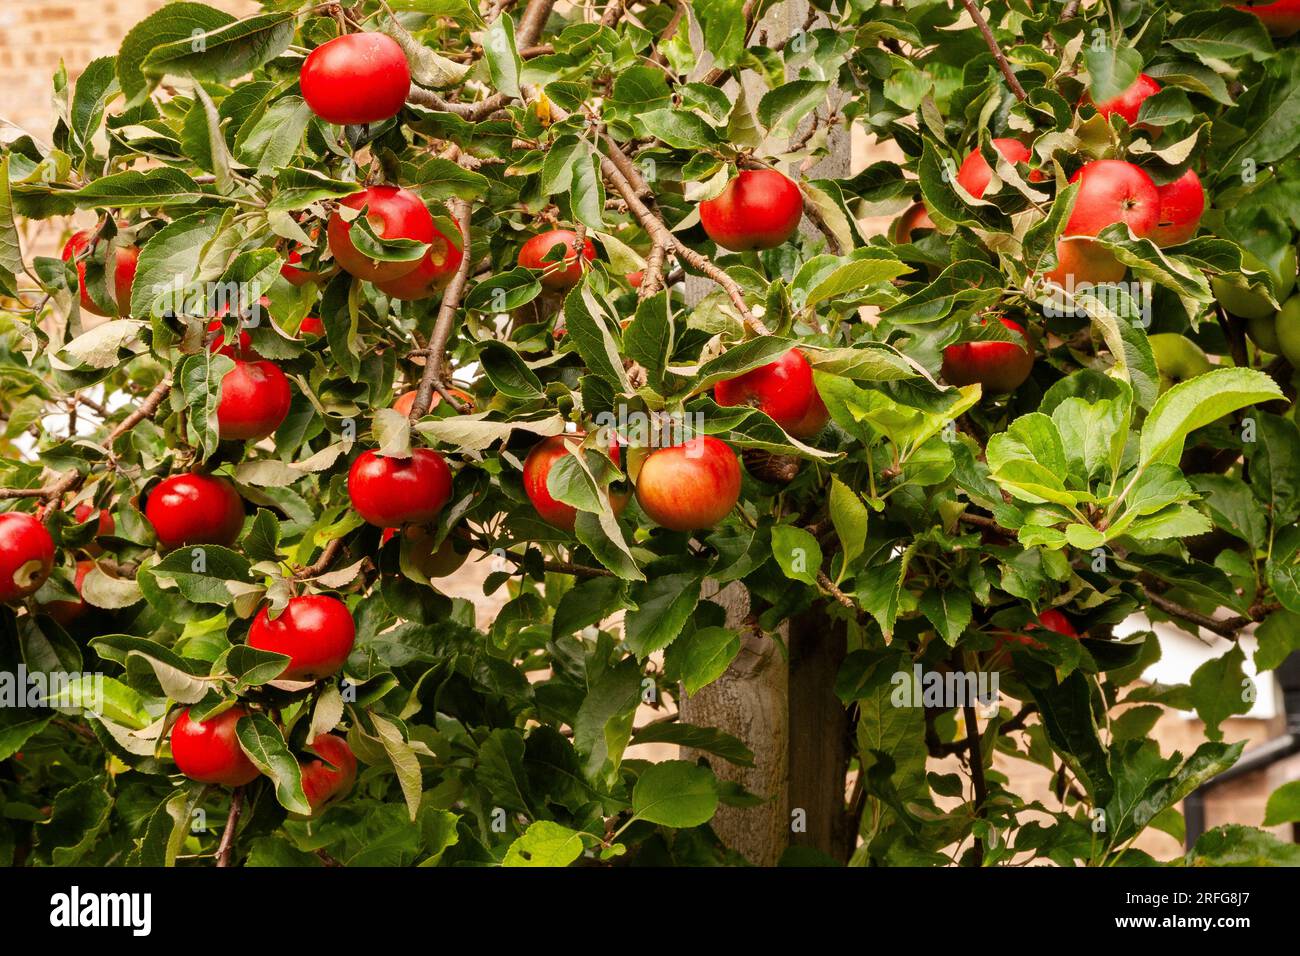 A Discovery Apple tree. The red apples are ripe and ready for picking. Stock Photo